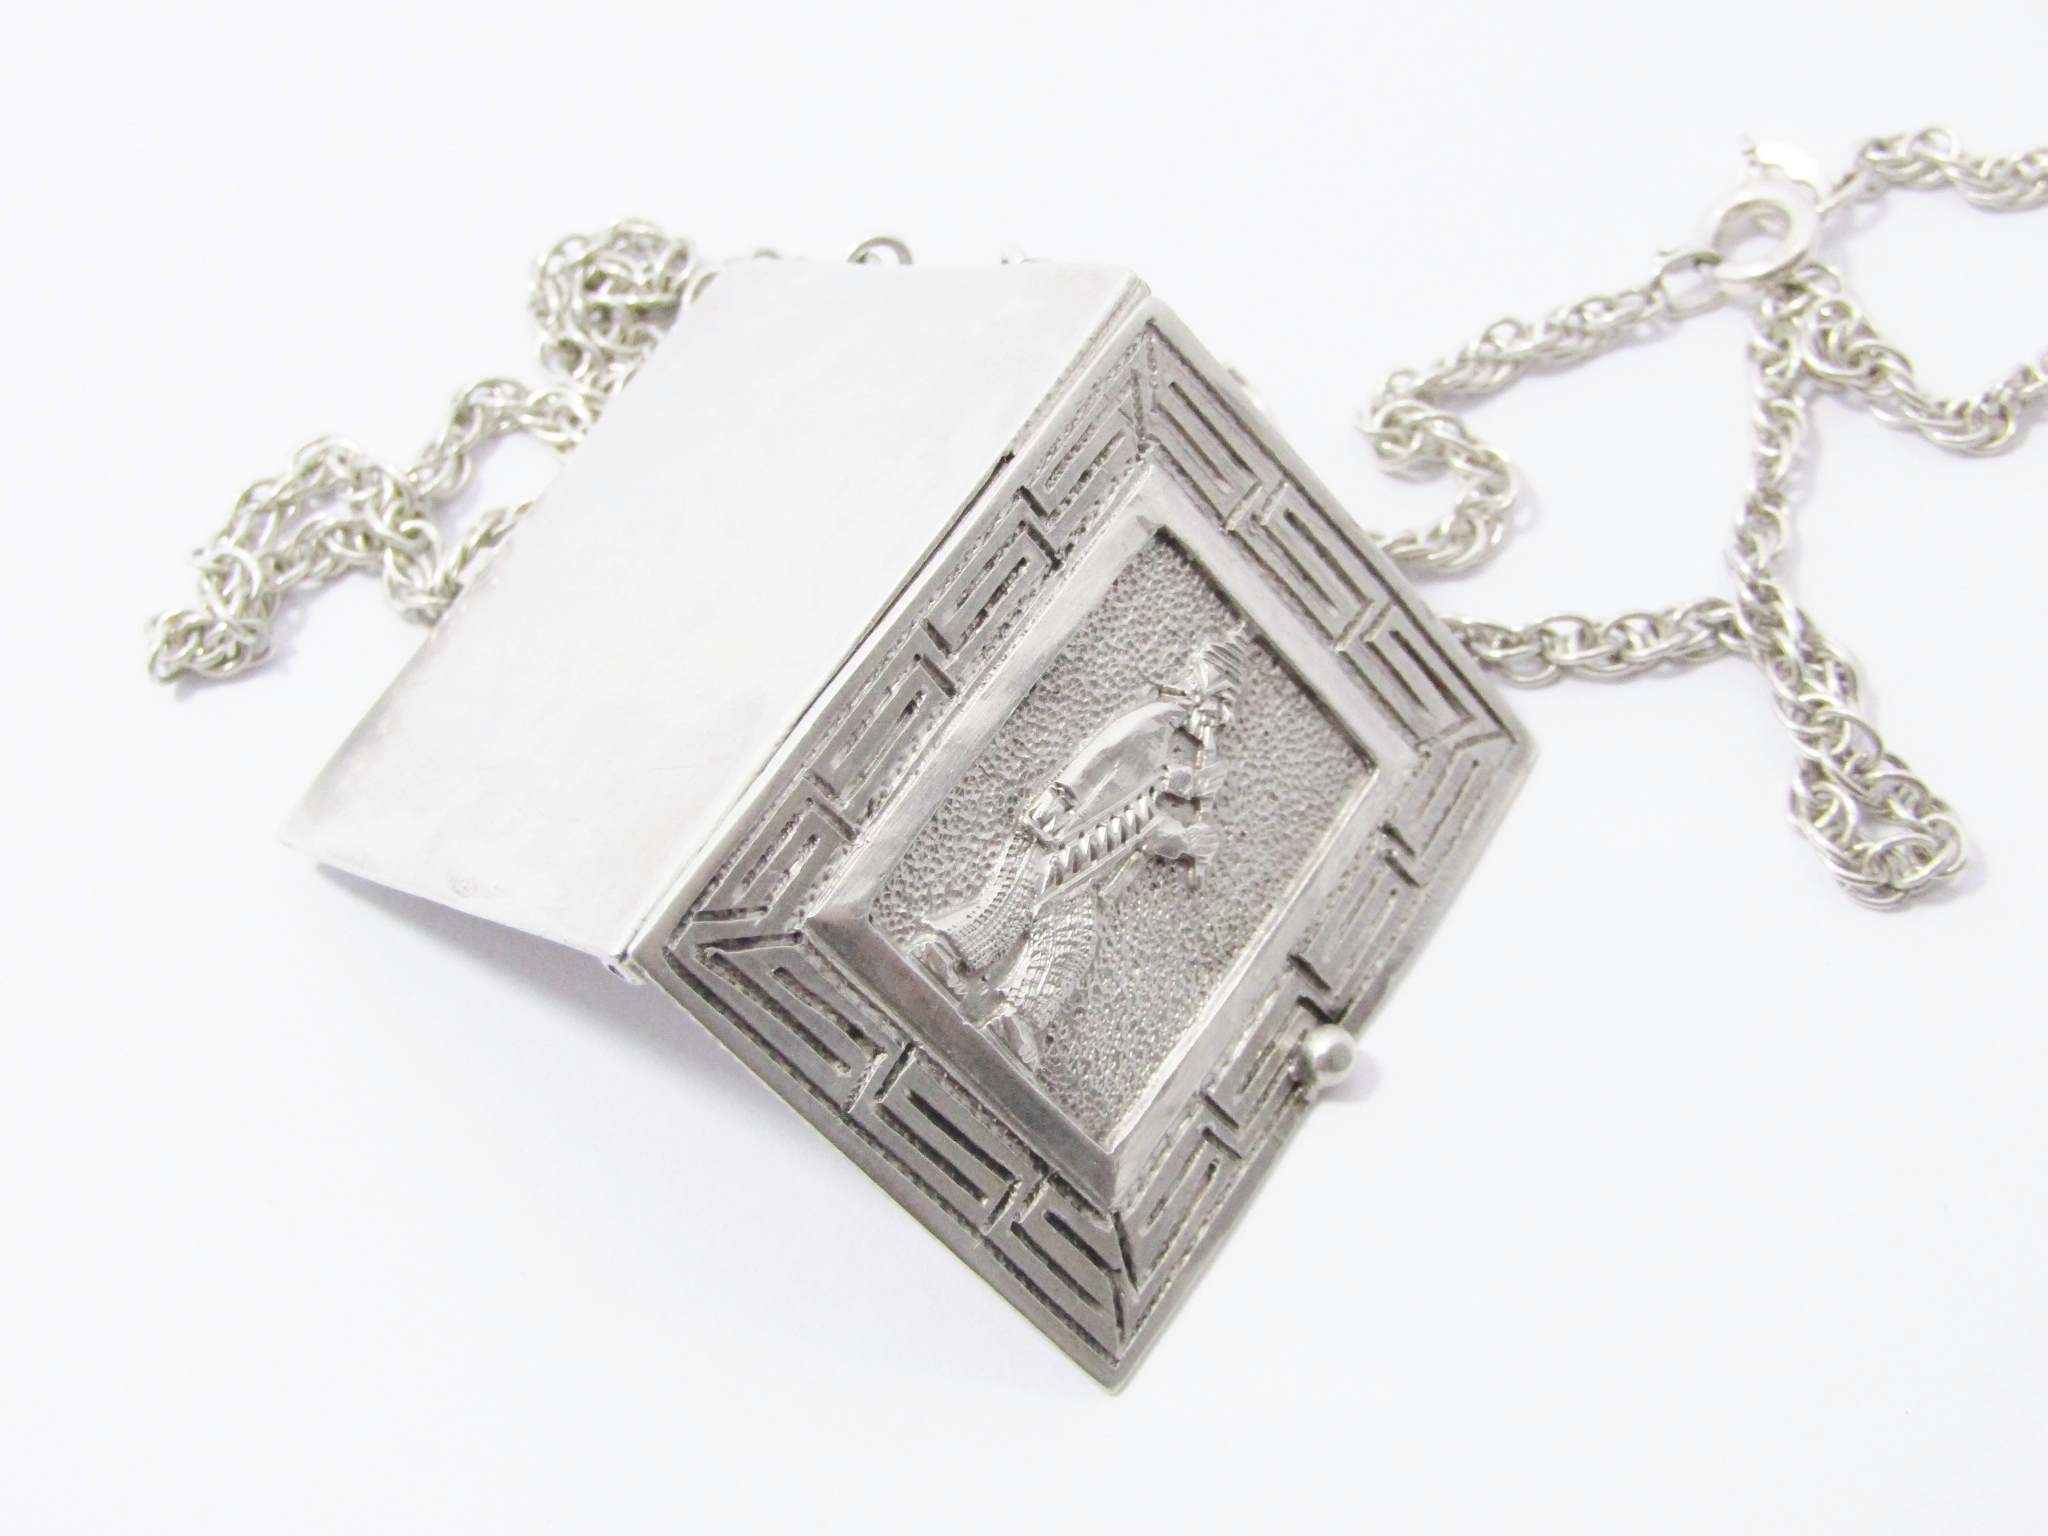 A Gorgeous Detailed Rectangular Book Design Locket On a long Chain in Sterling Silver.